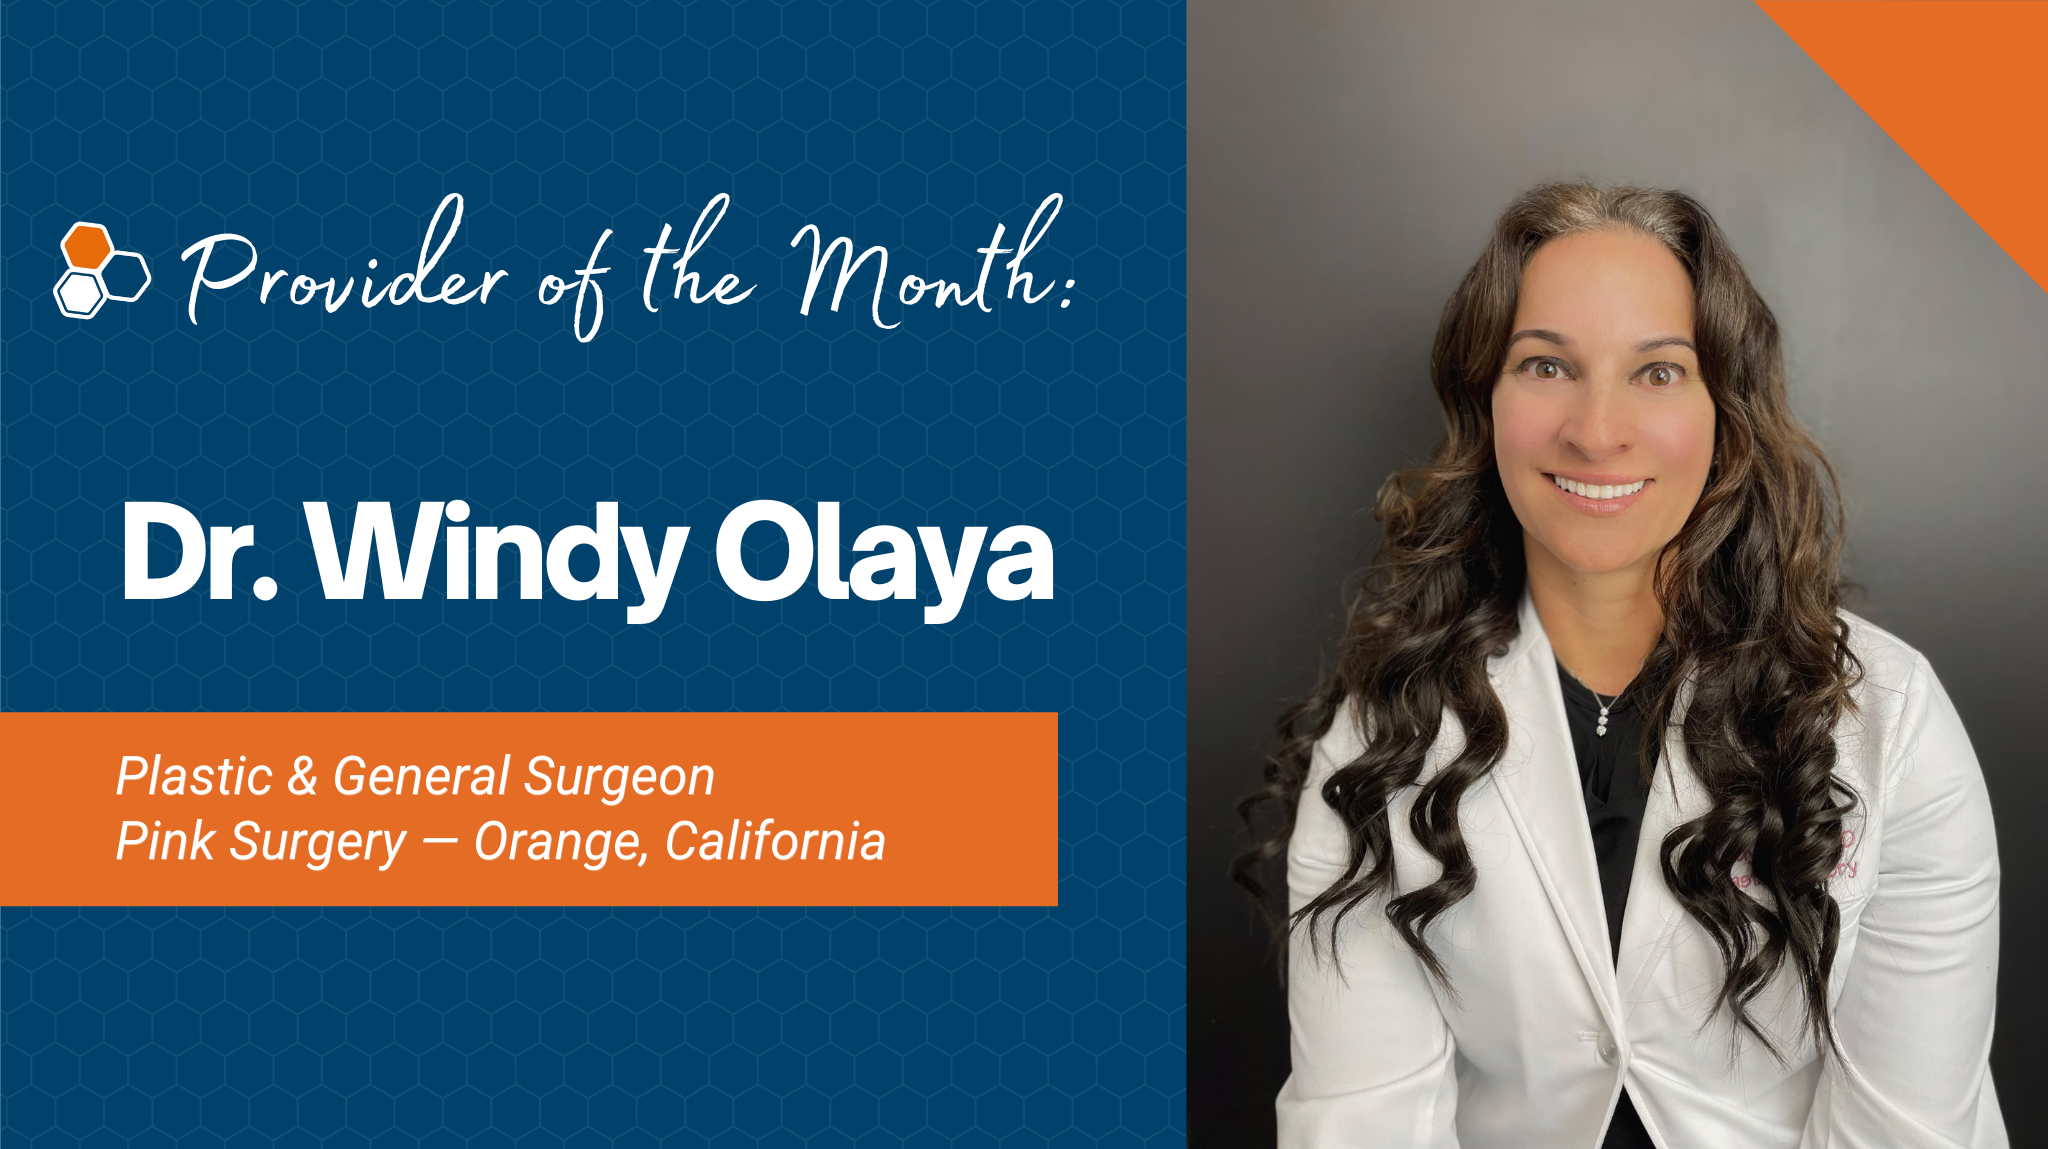 dr. windy olaya pink surgery provider of the month